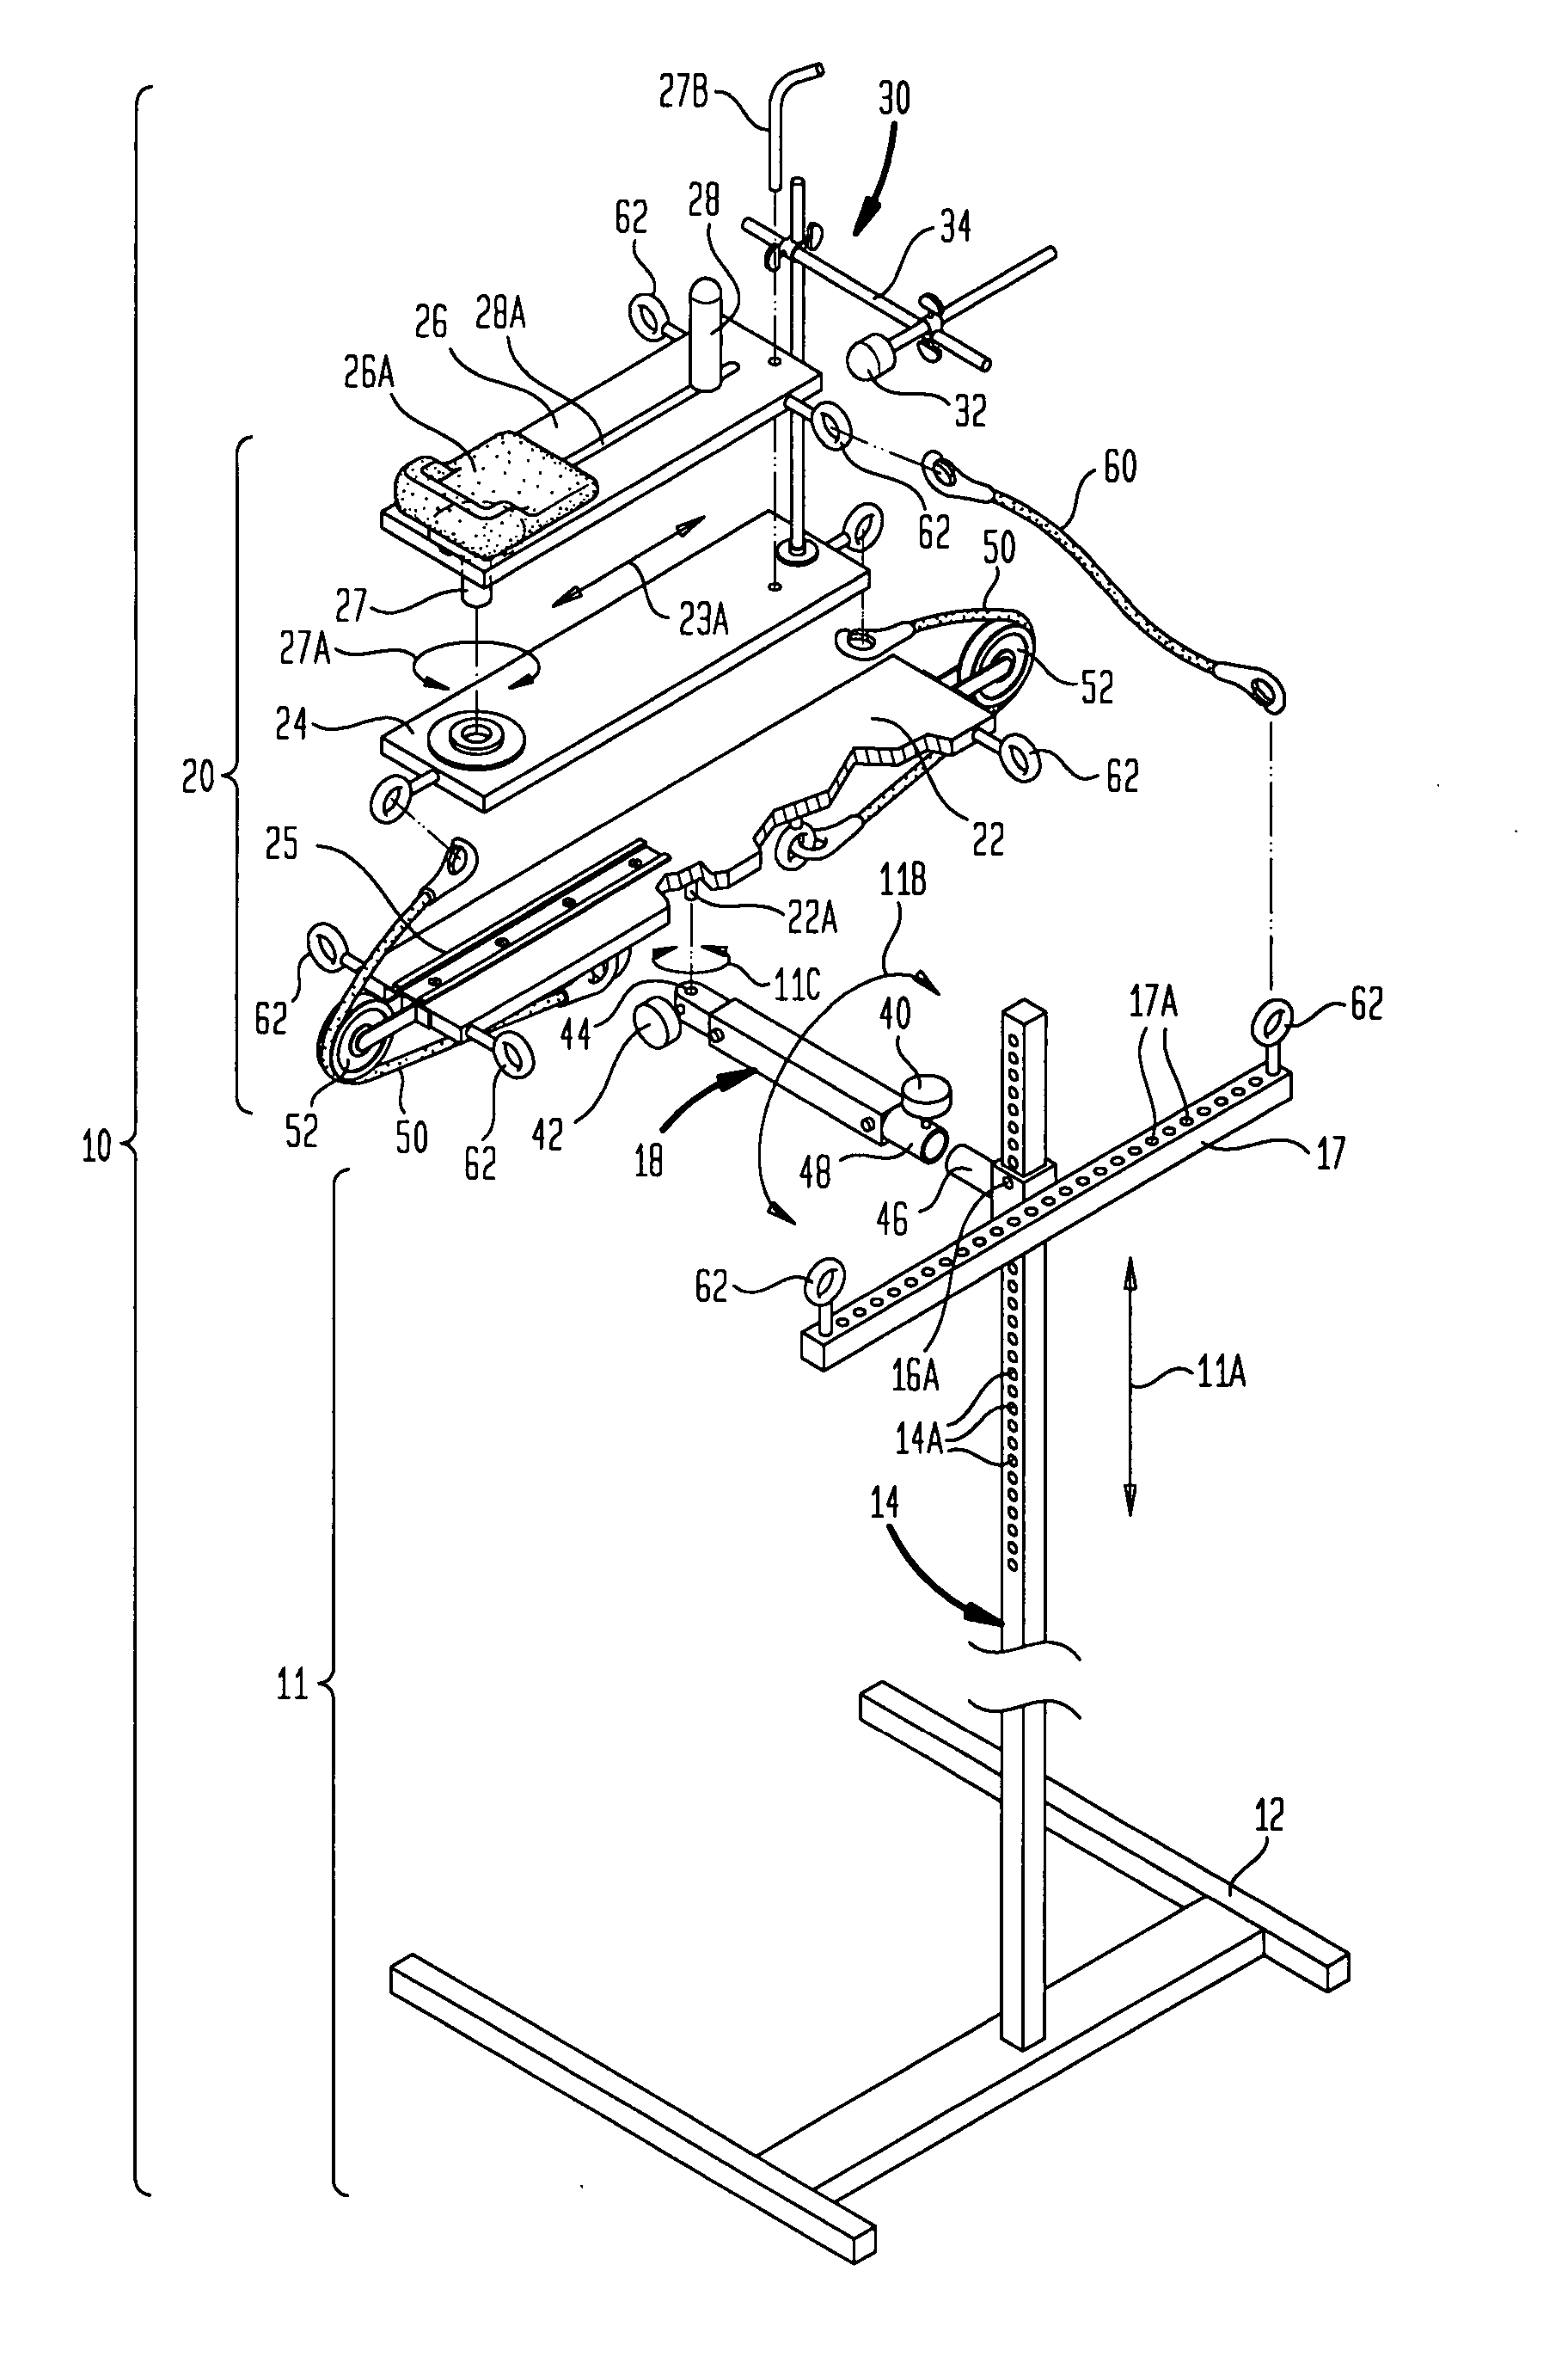 Shoulder stabilizing and strengthening apparatus